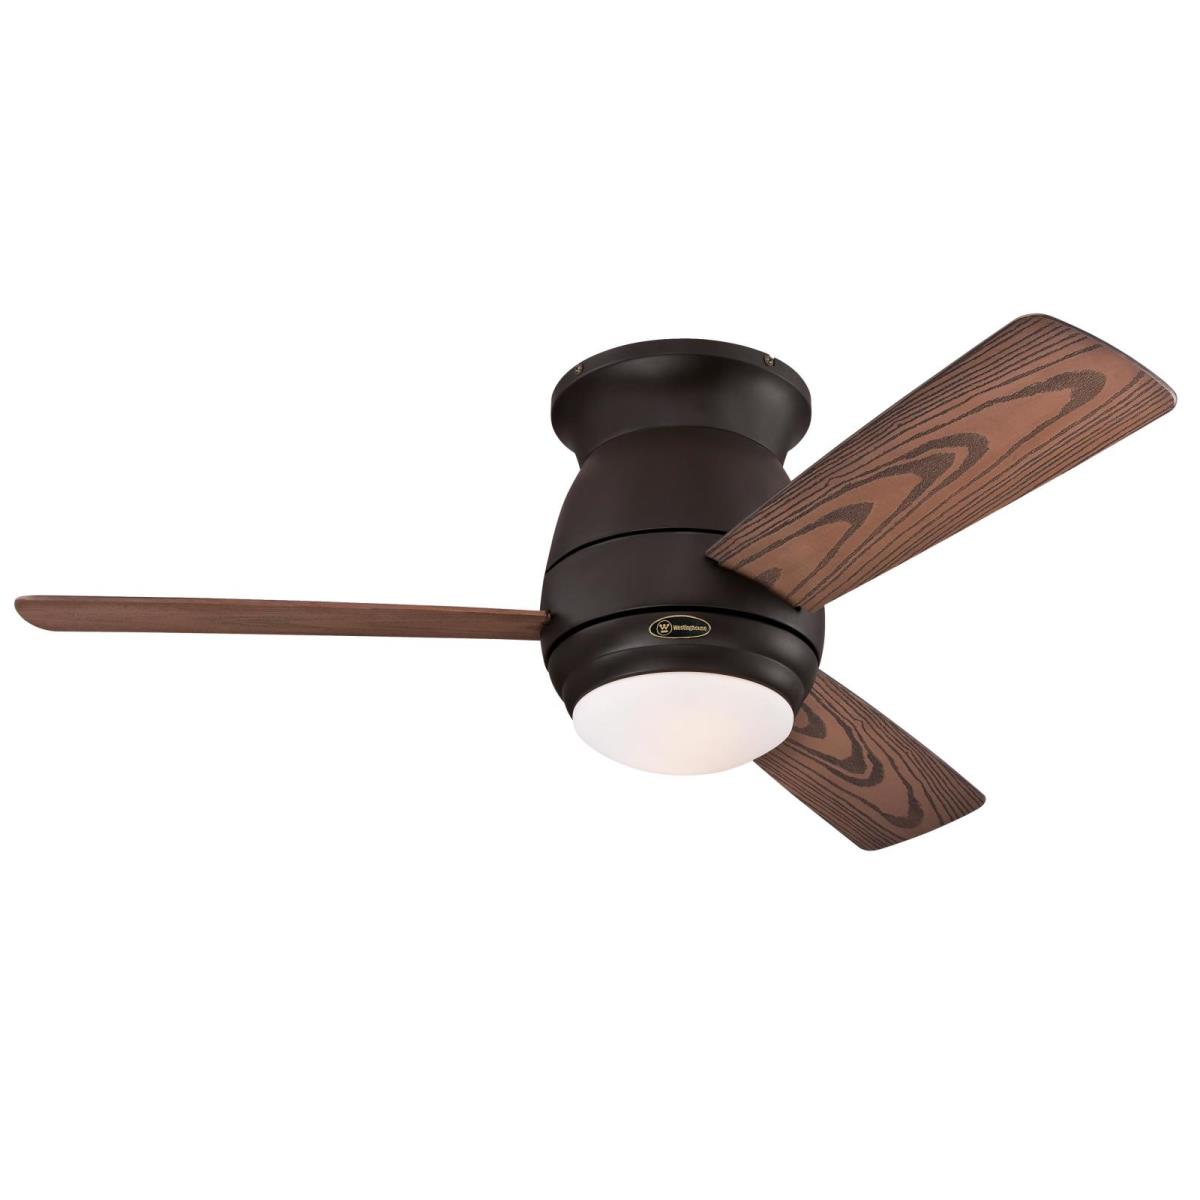 44" Oil Rubbed Bronze Finish Reversible ABS Blades (Dark Cherry/Mahogany) Includes Light Kit with Frosted Opal Glass